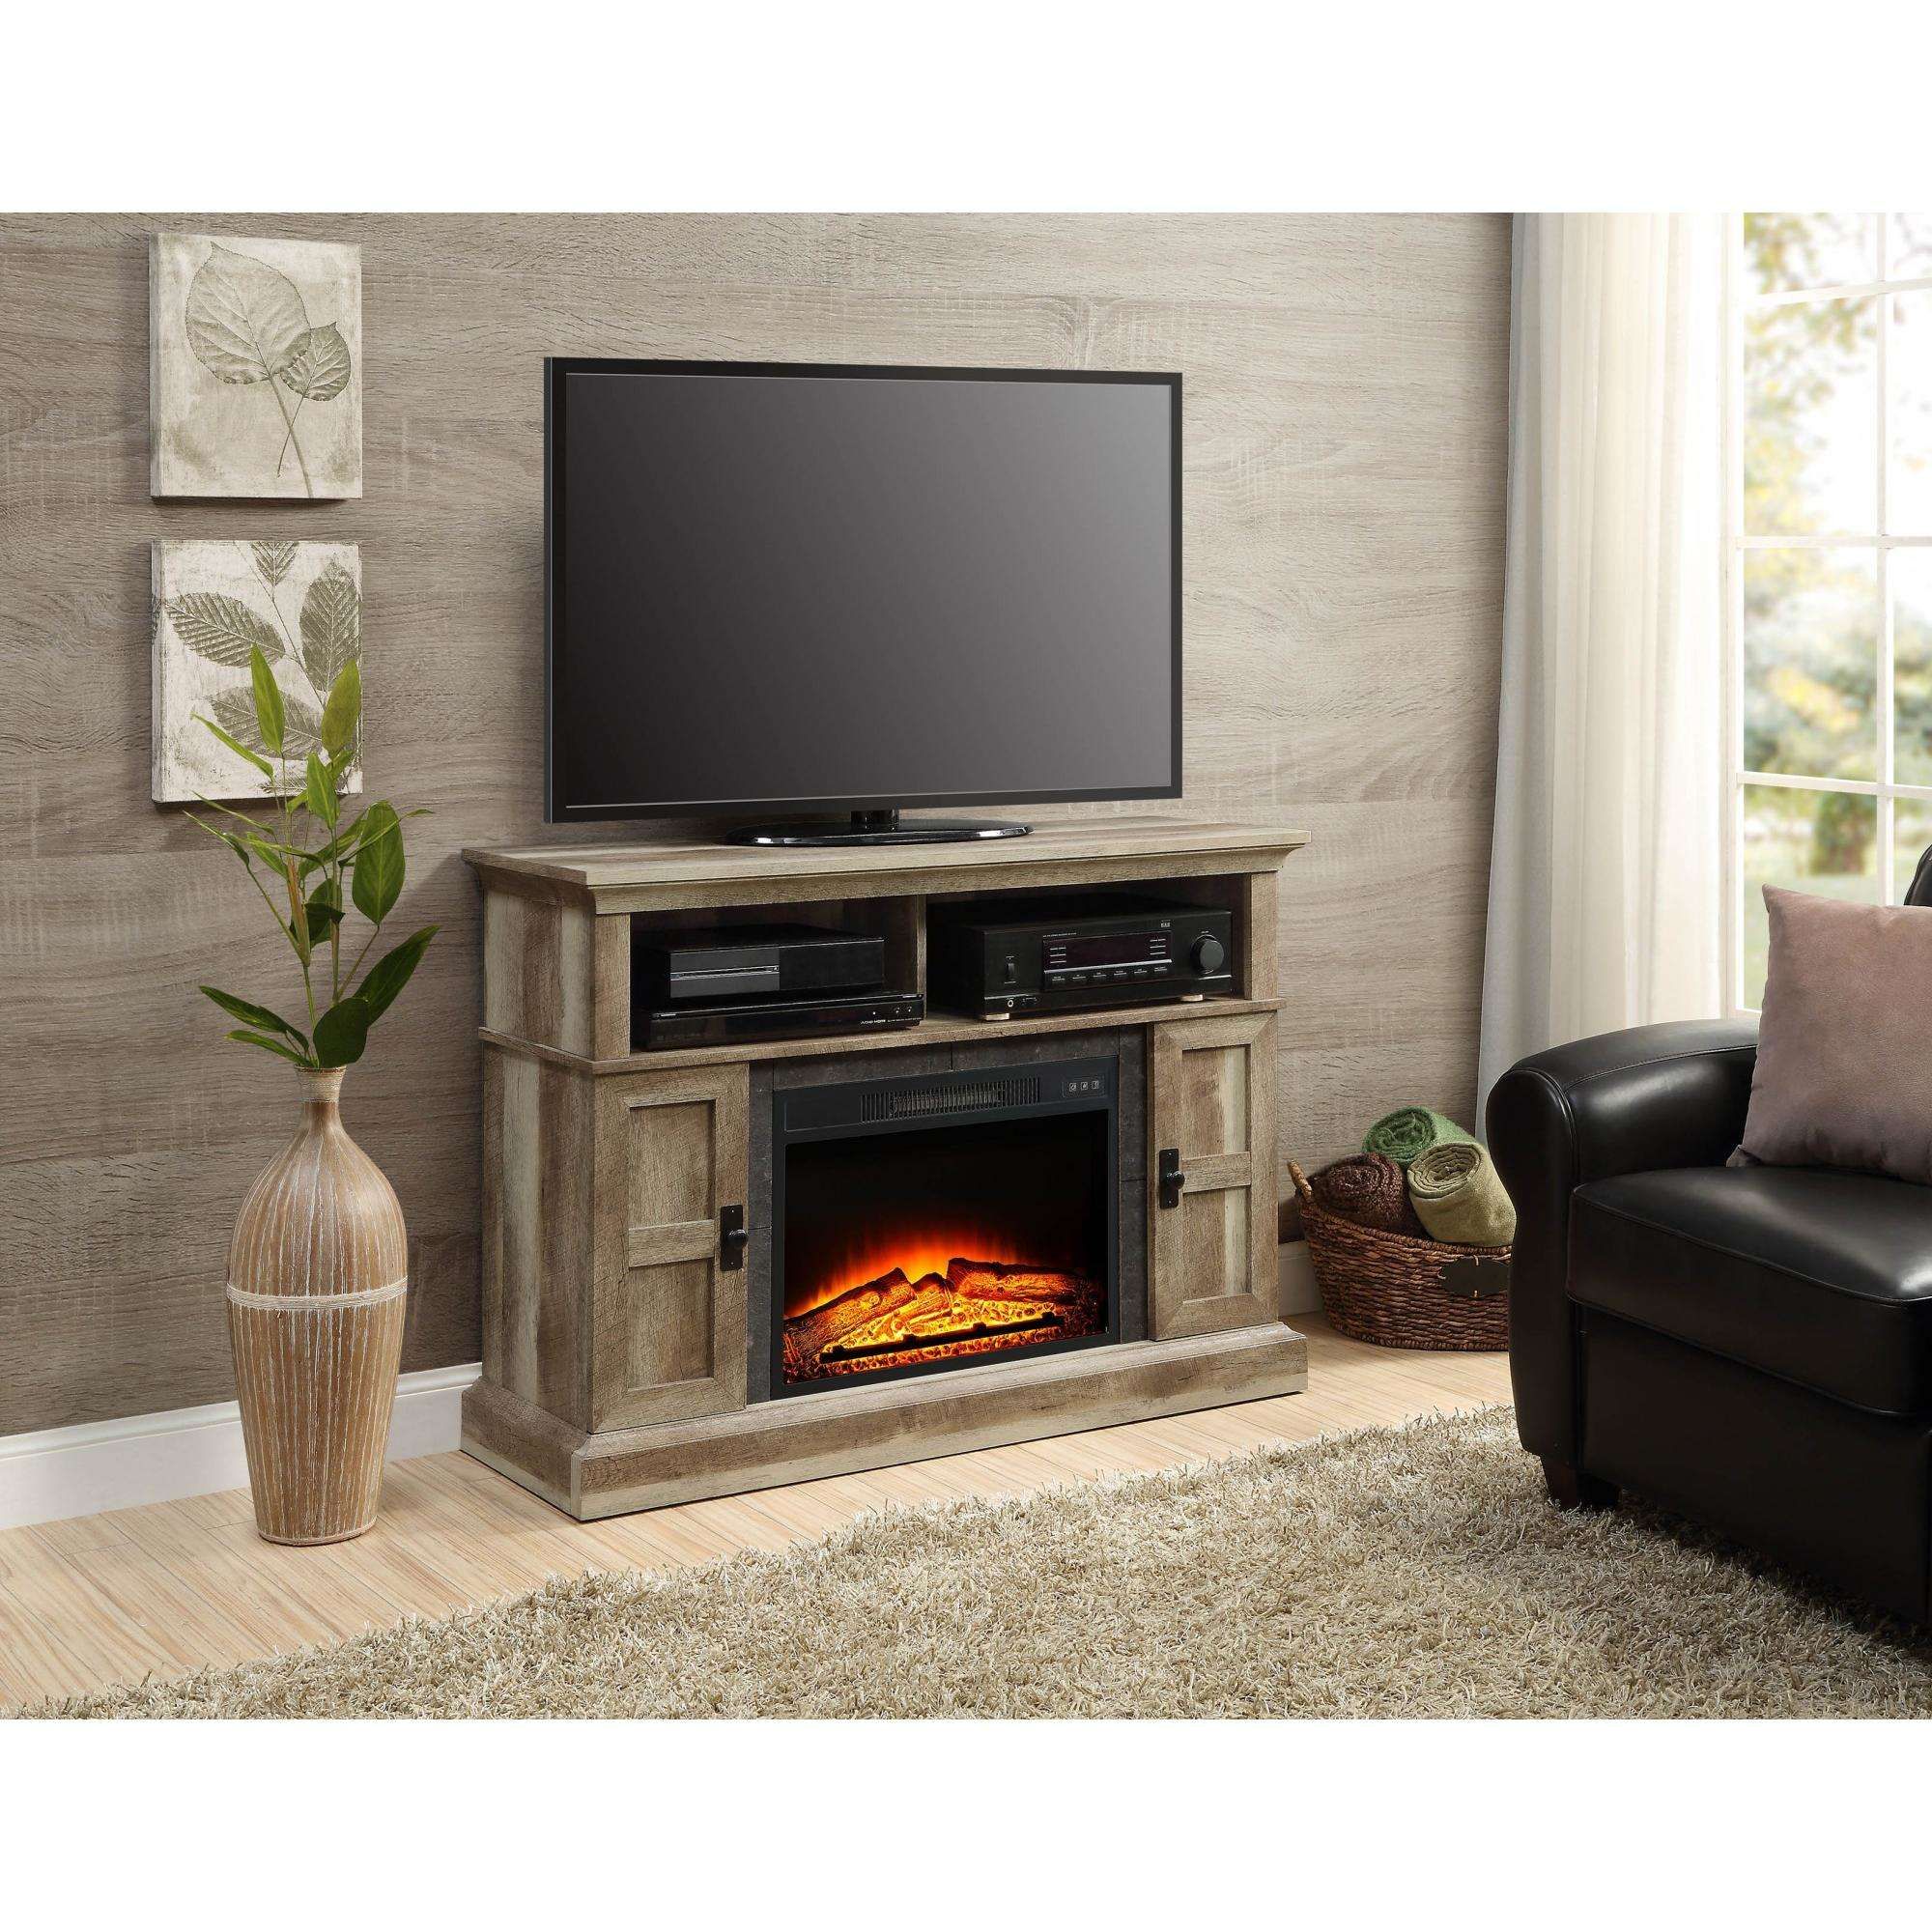 White Fireplace Tv Stand Awesome Whalen Media Fireplace for Your Home Television Stand Fits